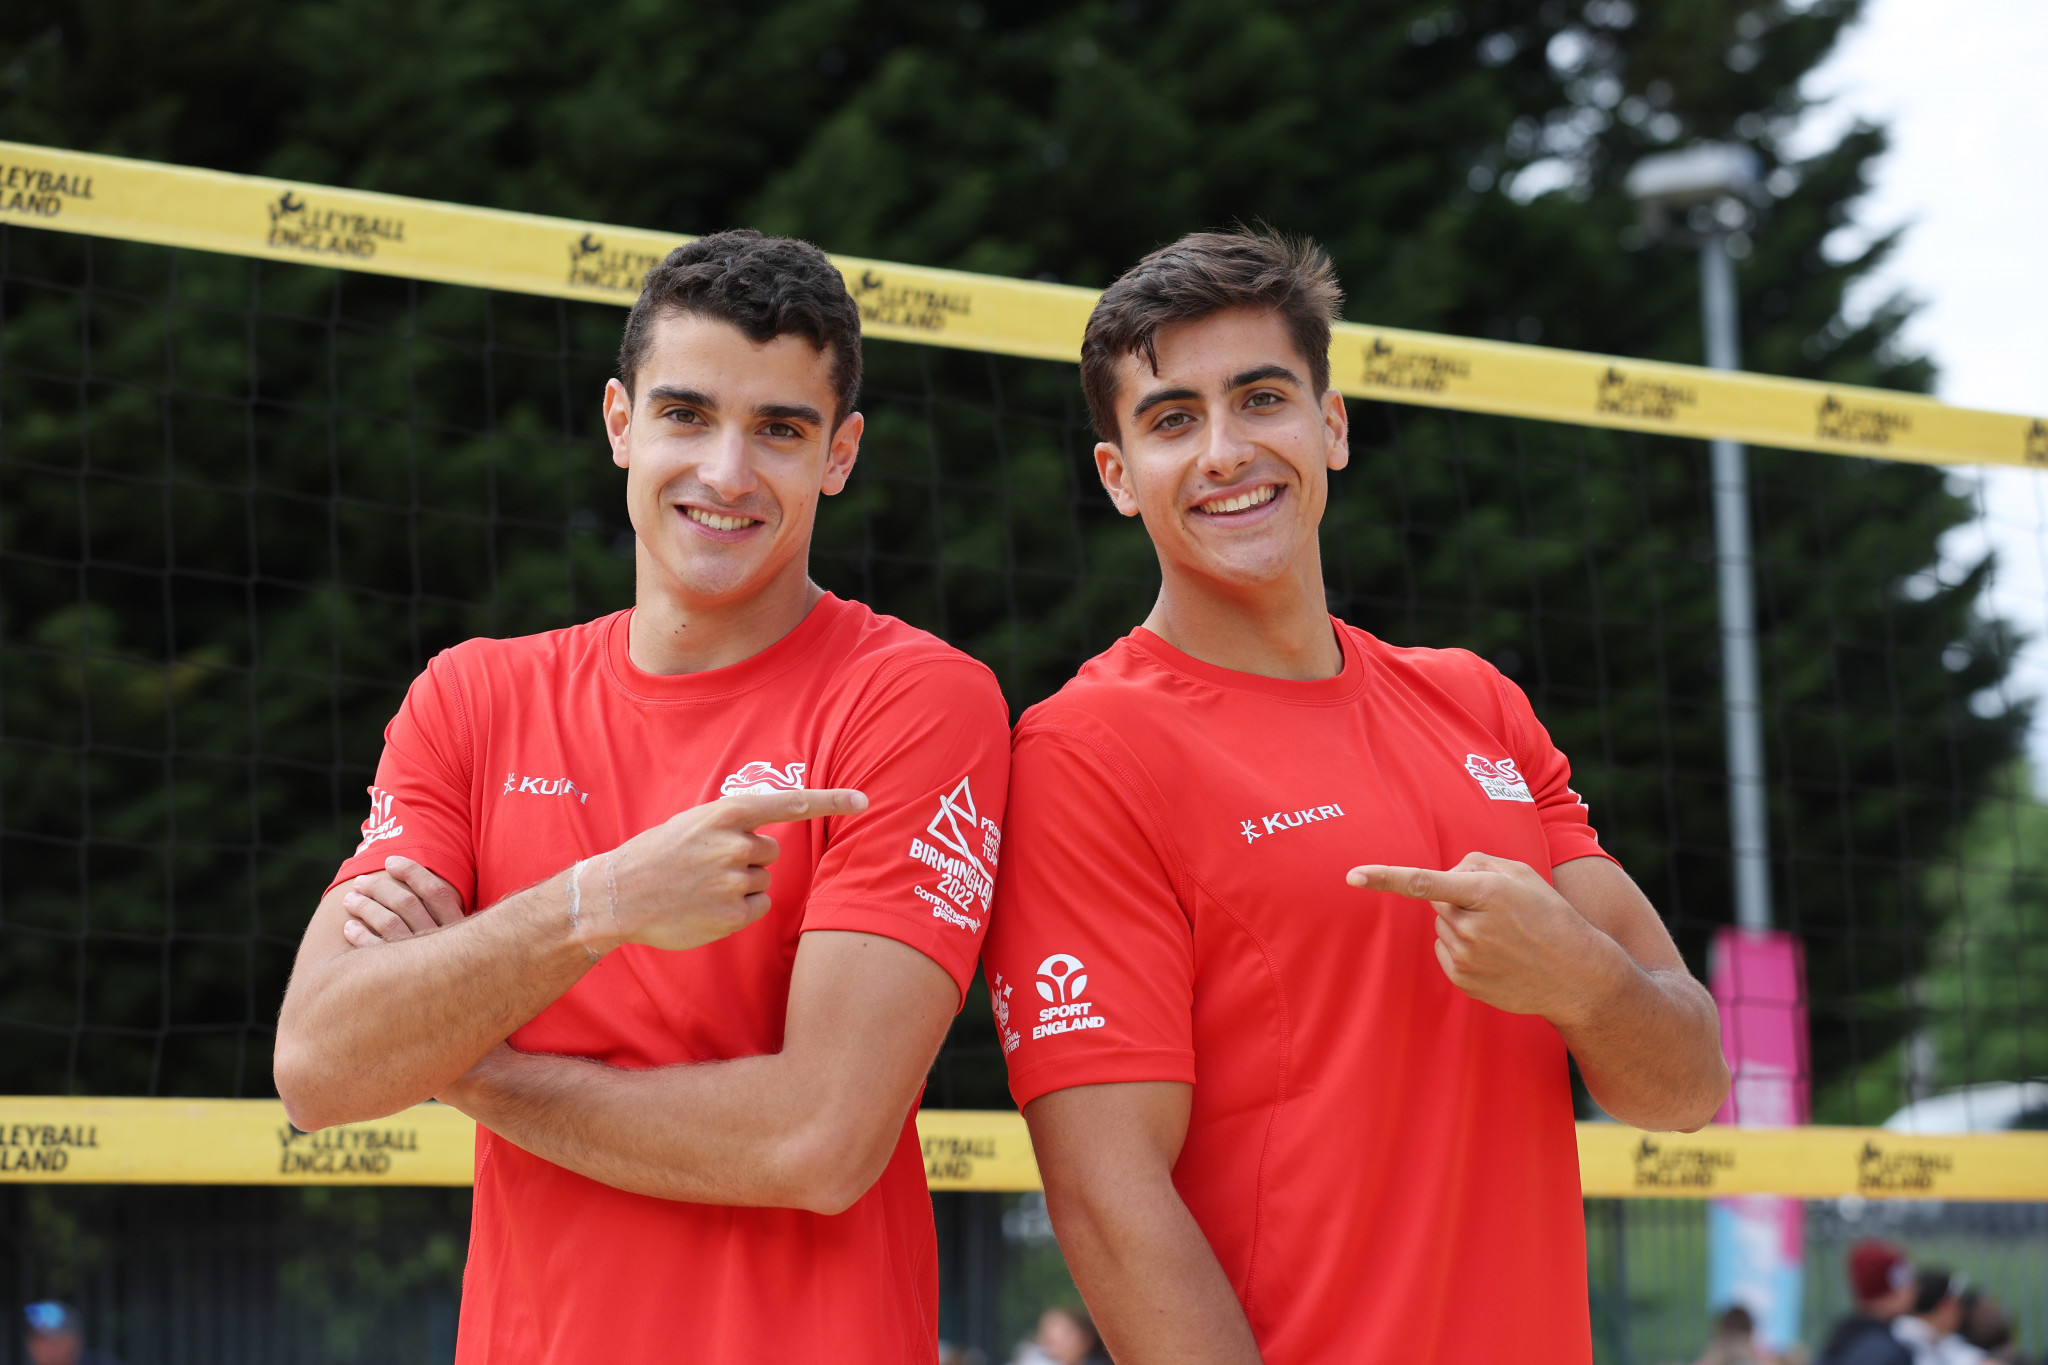 Javier and Joaquin Bello are to represent England at Birmingham 2022 ©Volleyball England